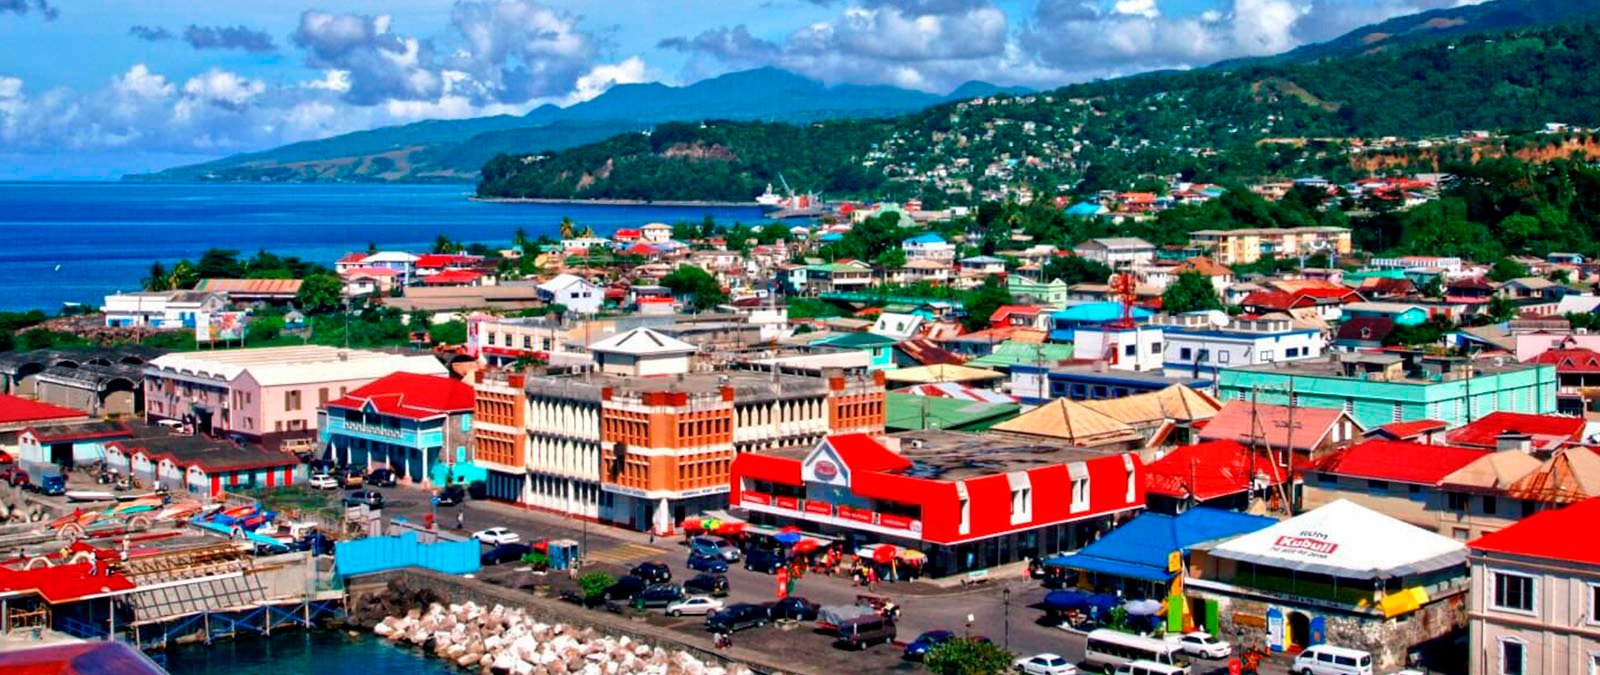 Dominica Citizenship by Investment is a reputable program that has been in operation since 1993 and is legally guaranteed by Dominican law.